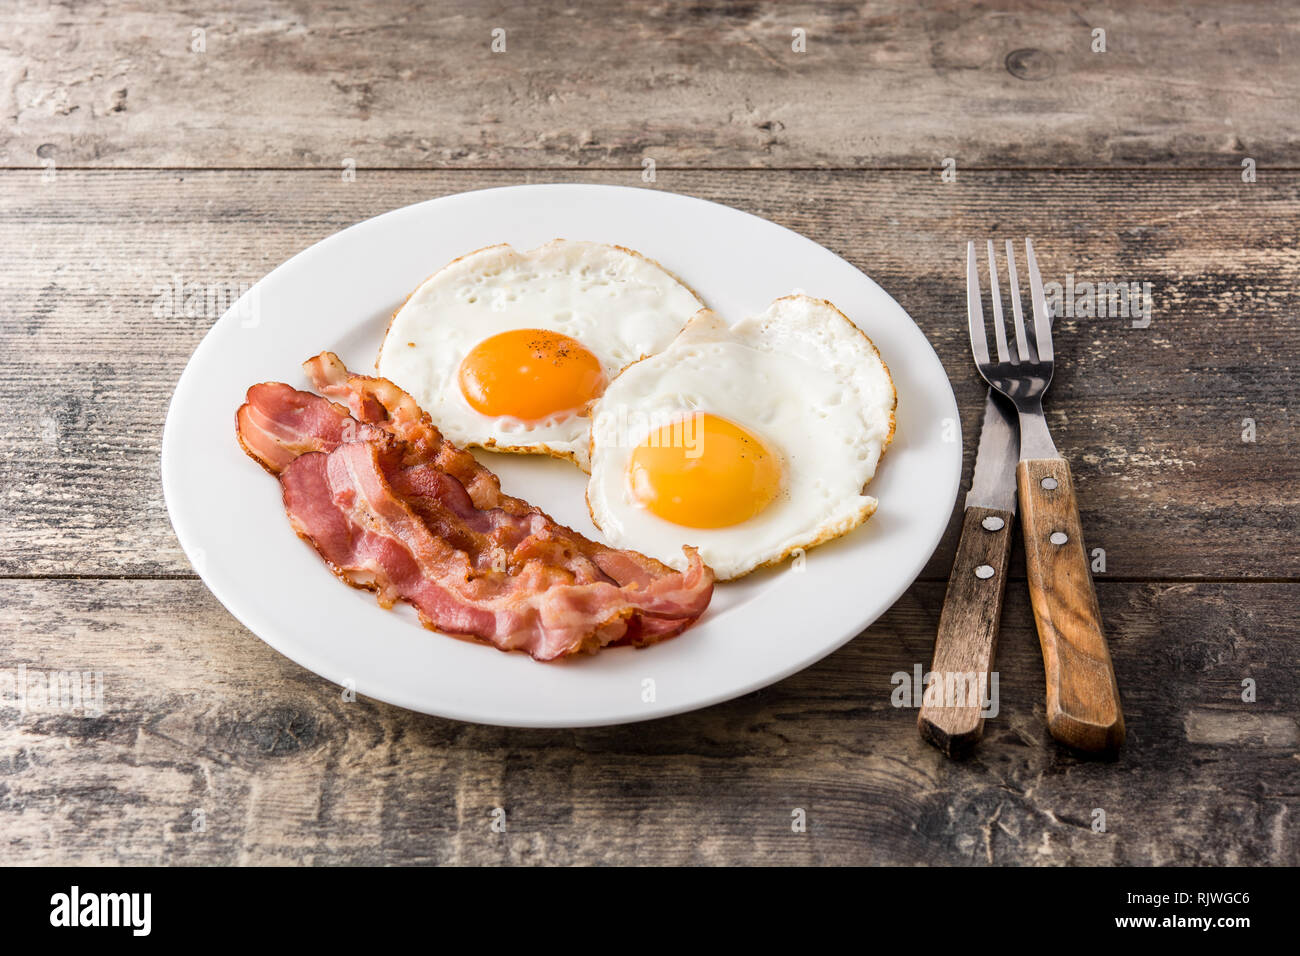 Fried eggs and bacon for breakfast on wooden table. Stock Photo